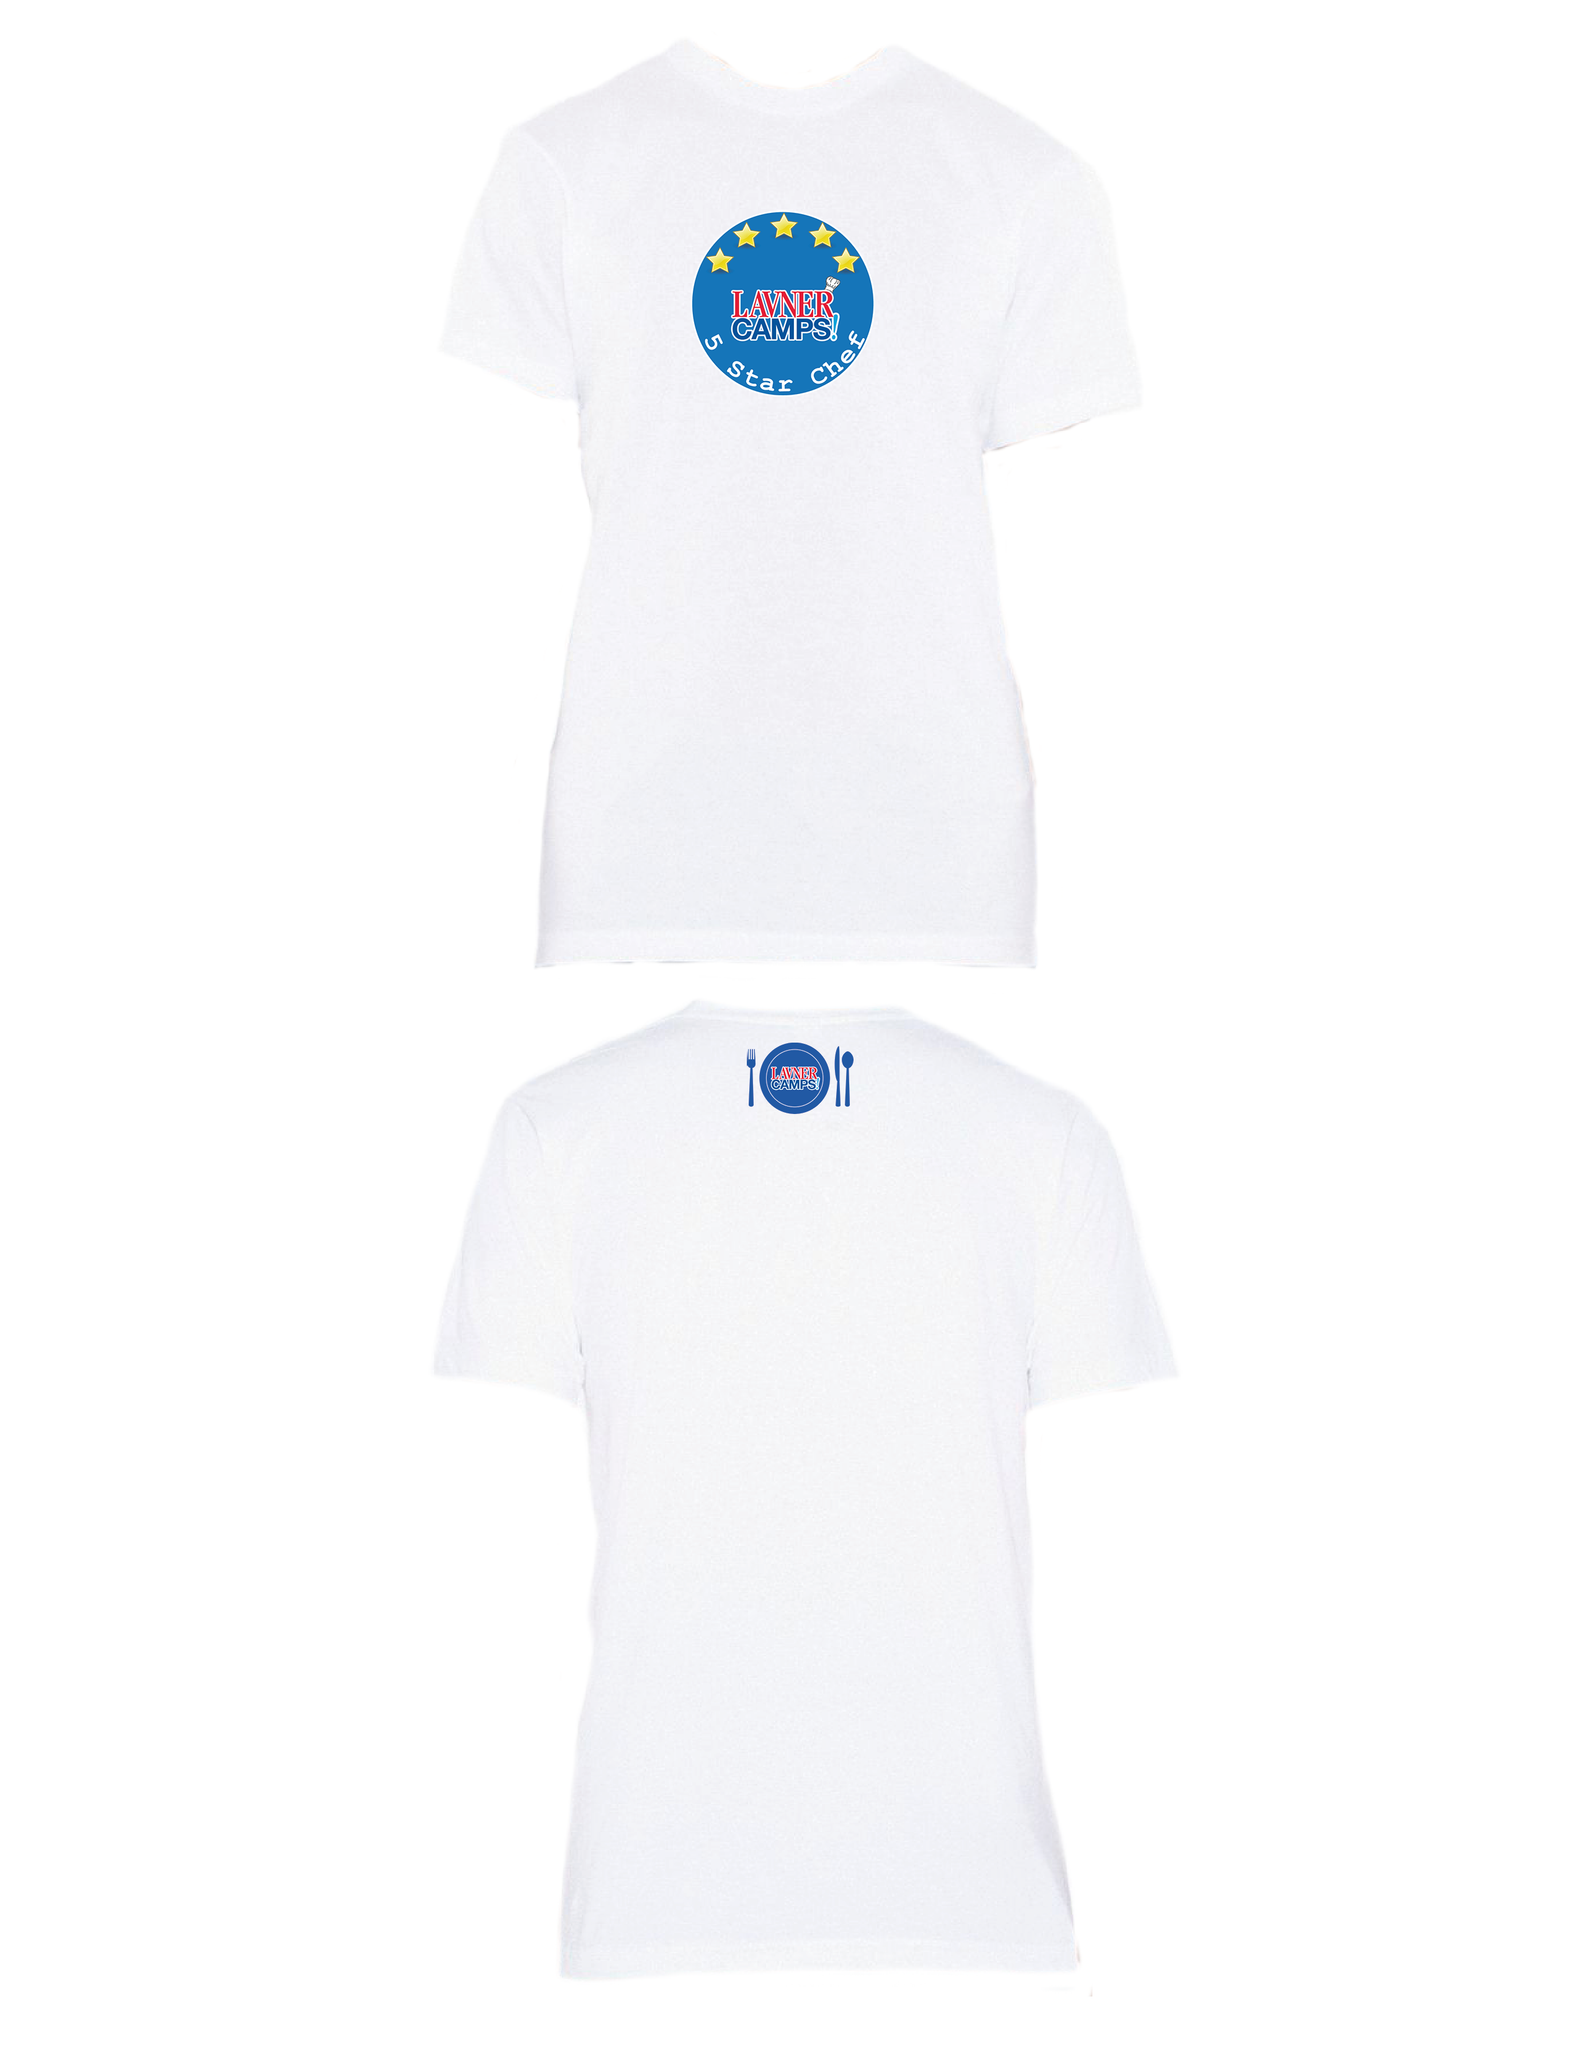 5 Star Chef T-Shirt (Youth)